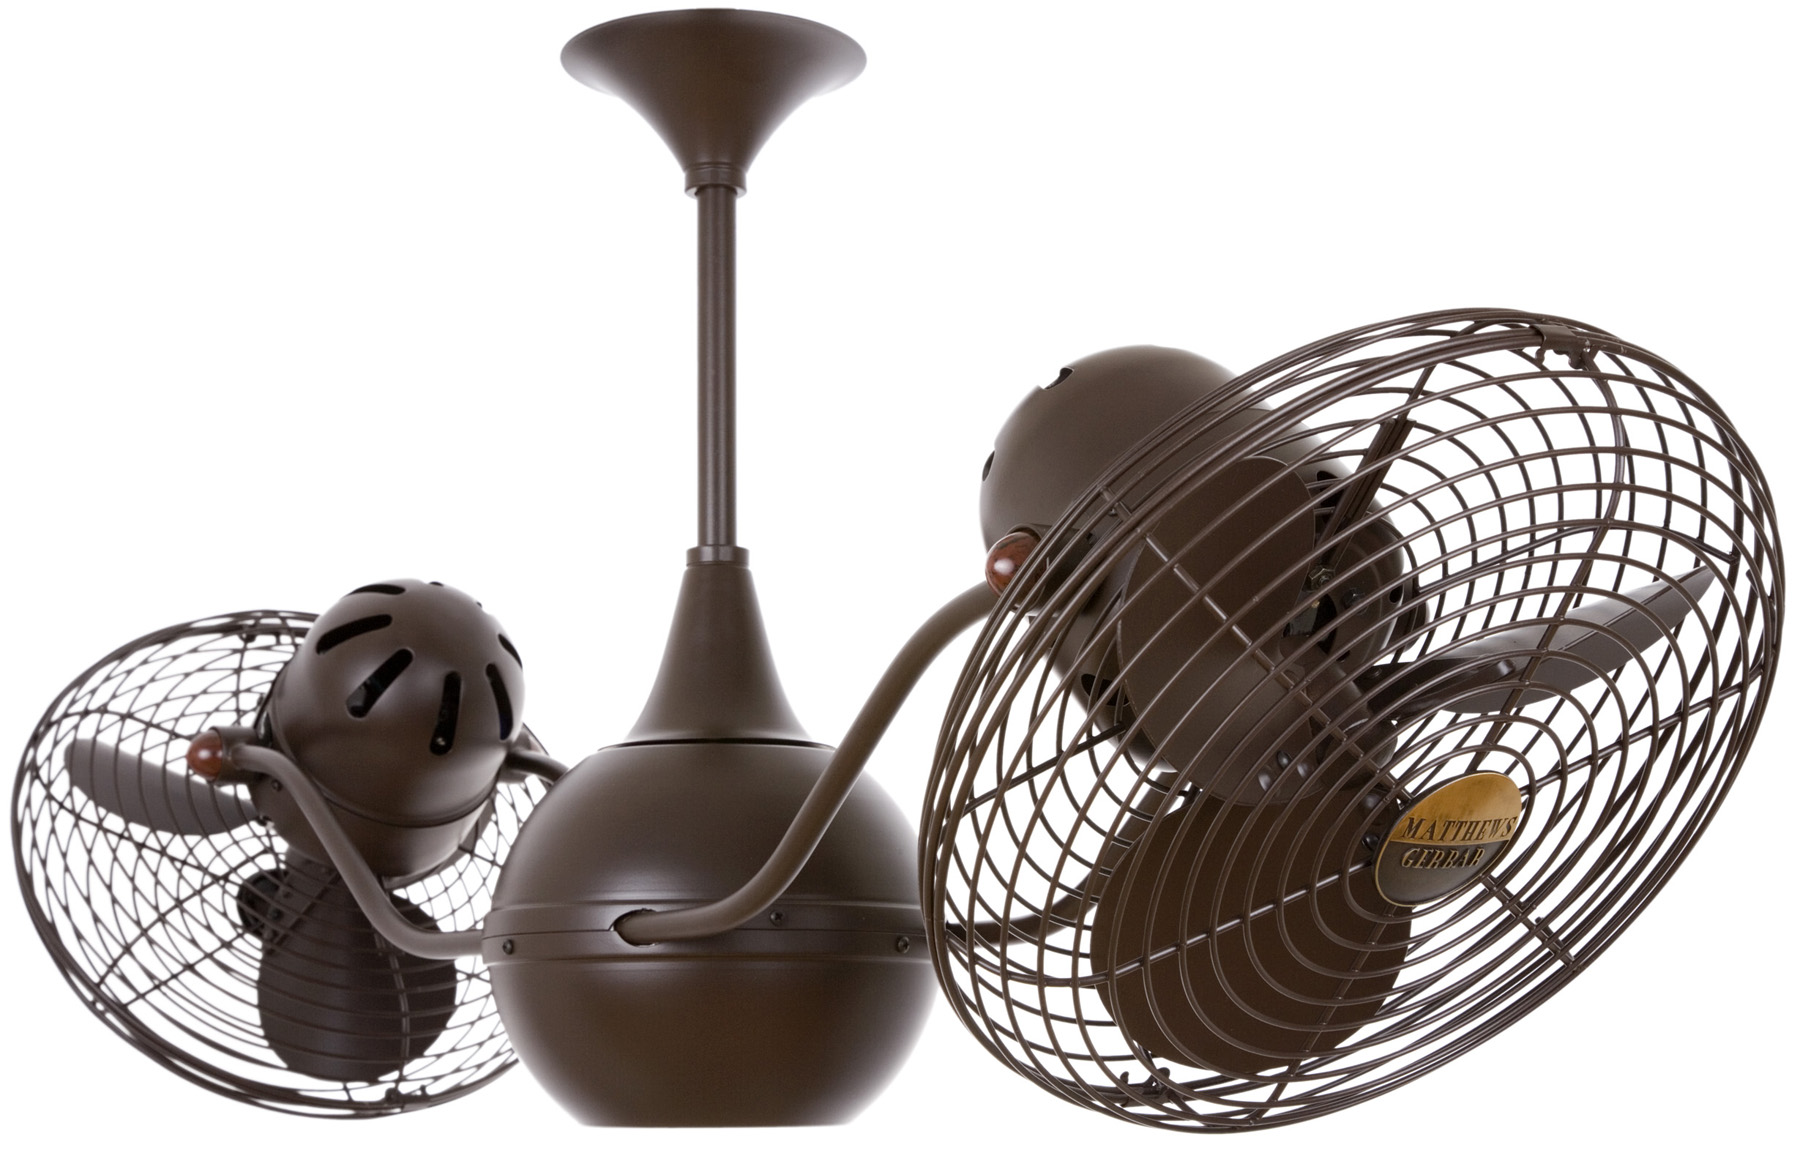 Vent-Bettina Rotational Dual Head Ceiling Fan in Bronzette Finish with Metal Blades and Safety Cage